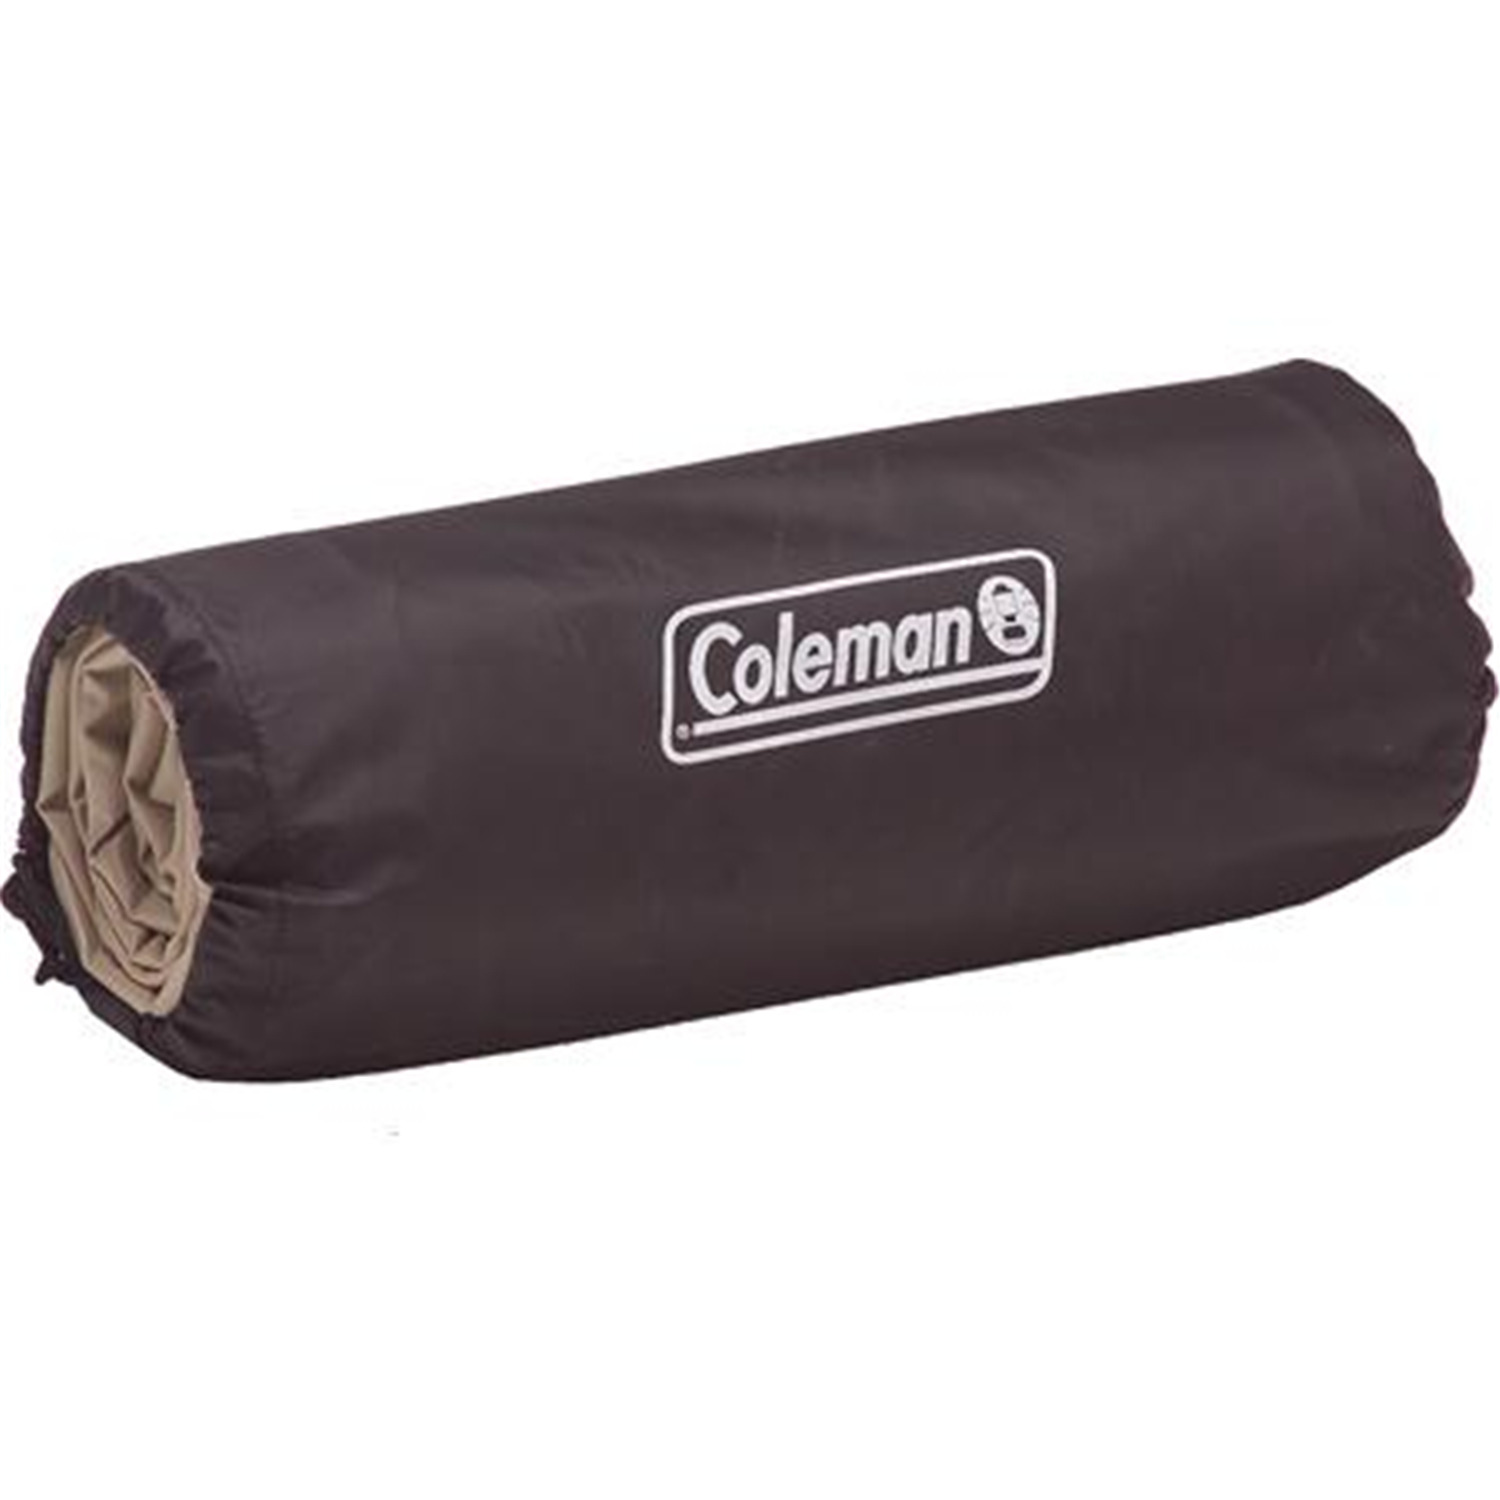 Inflatable Mattress-Size:Queen - image 1 of 3